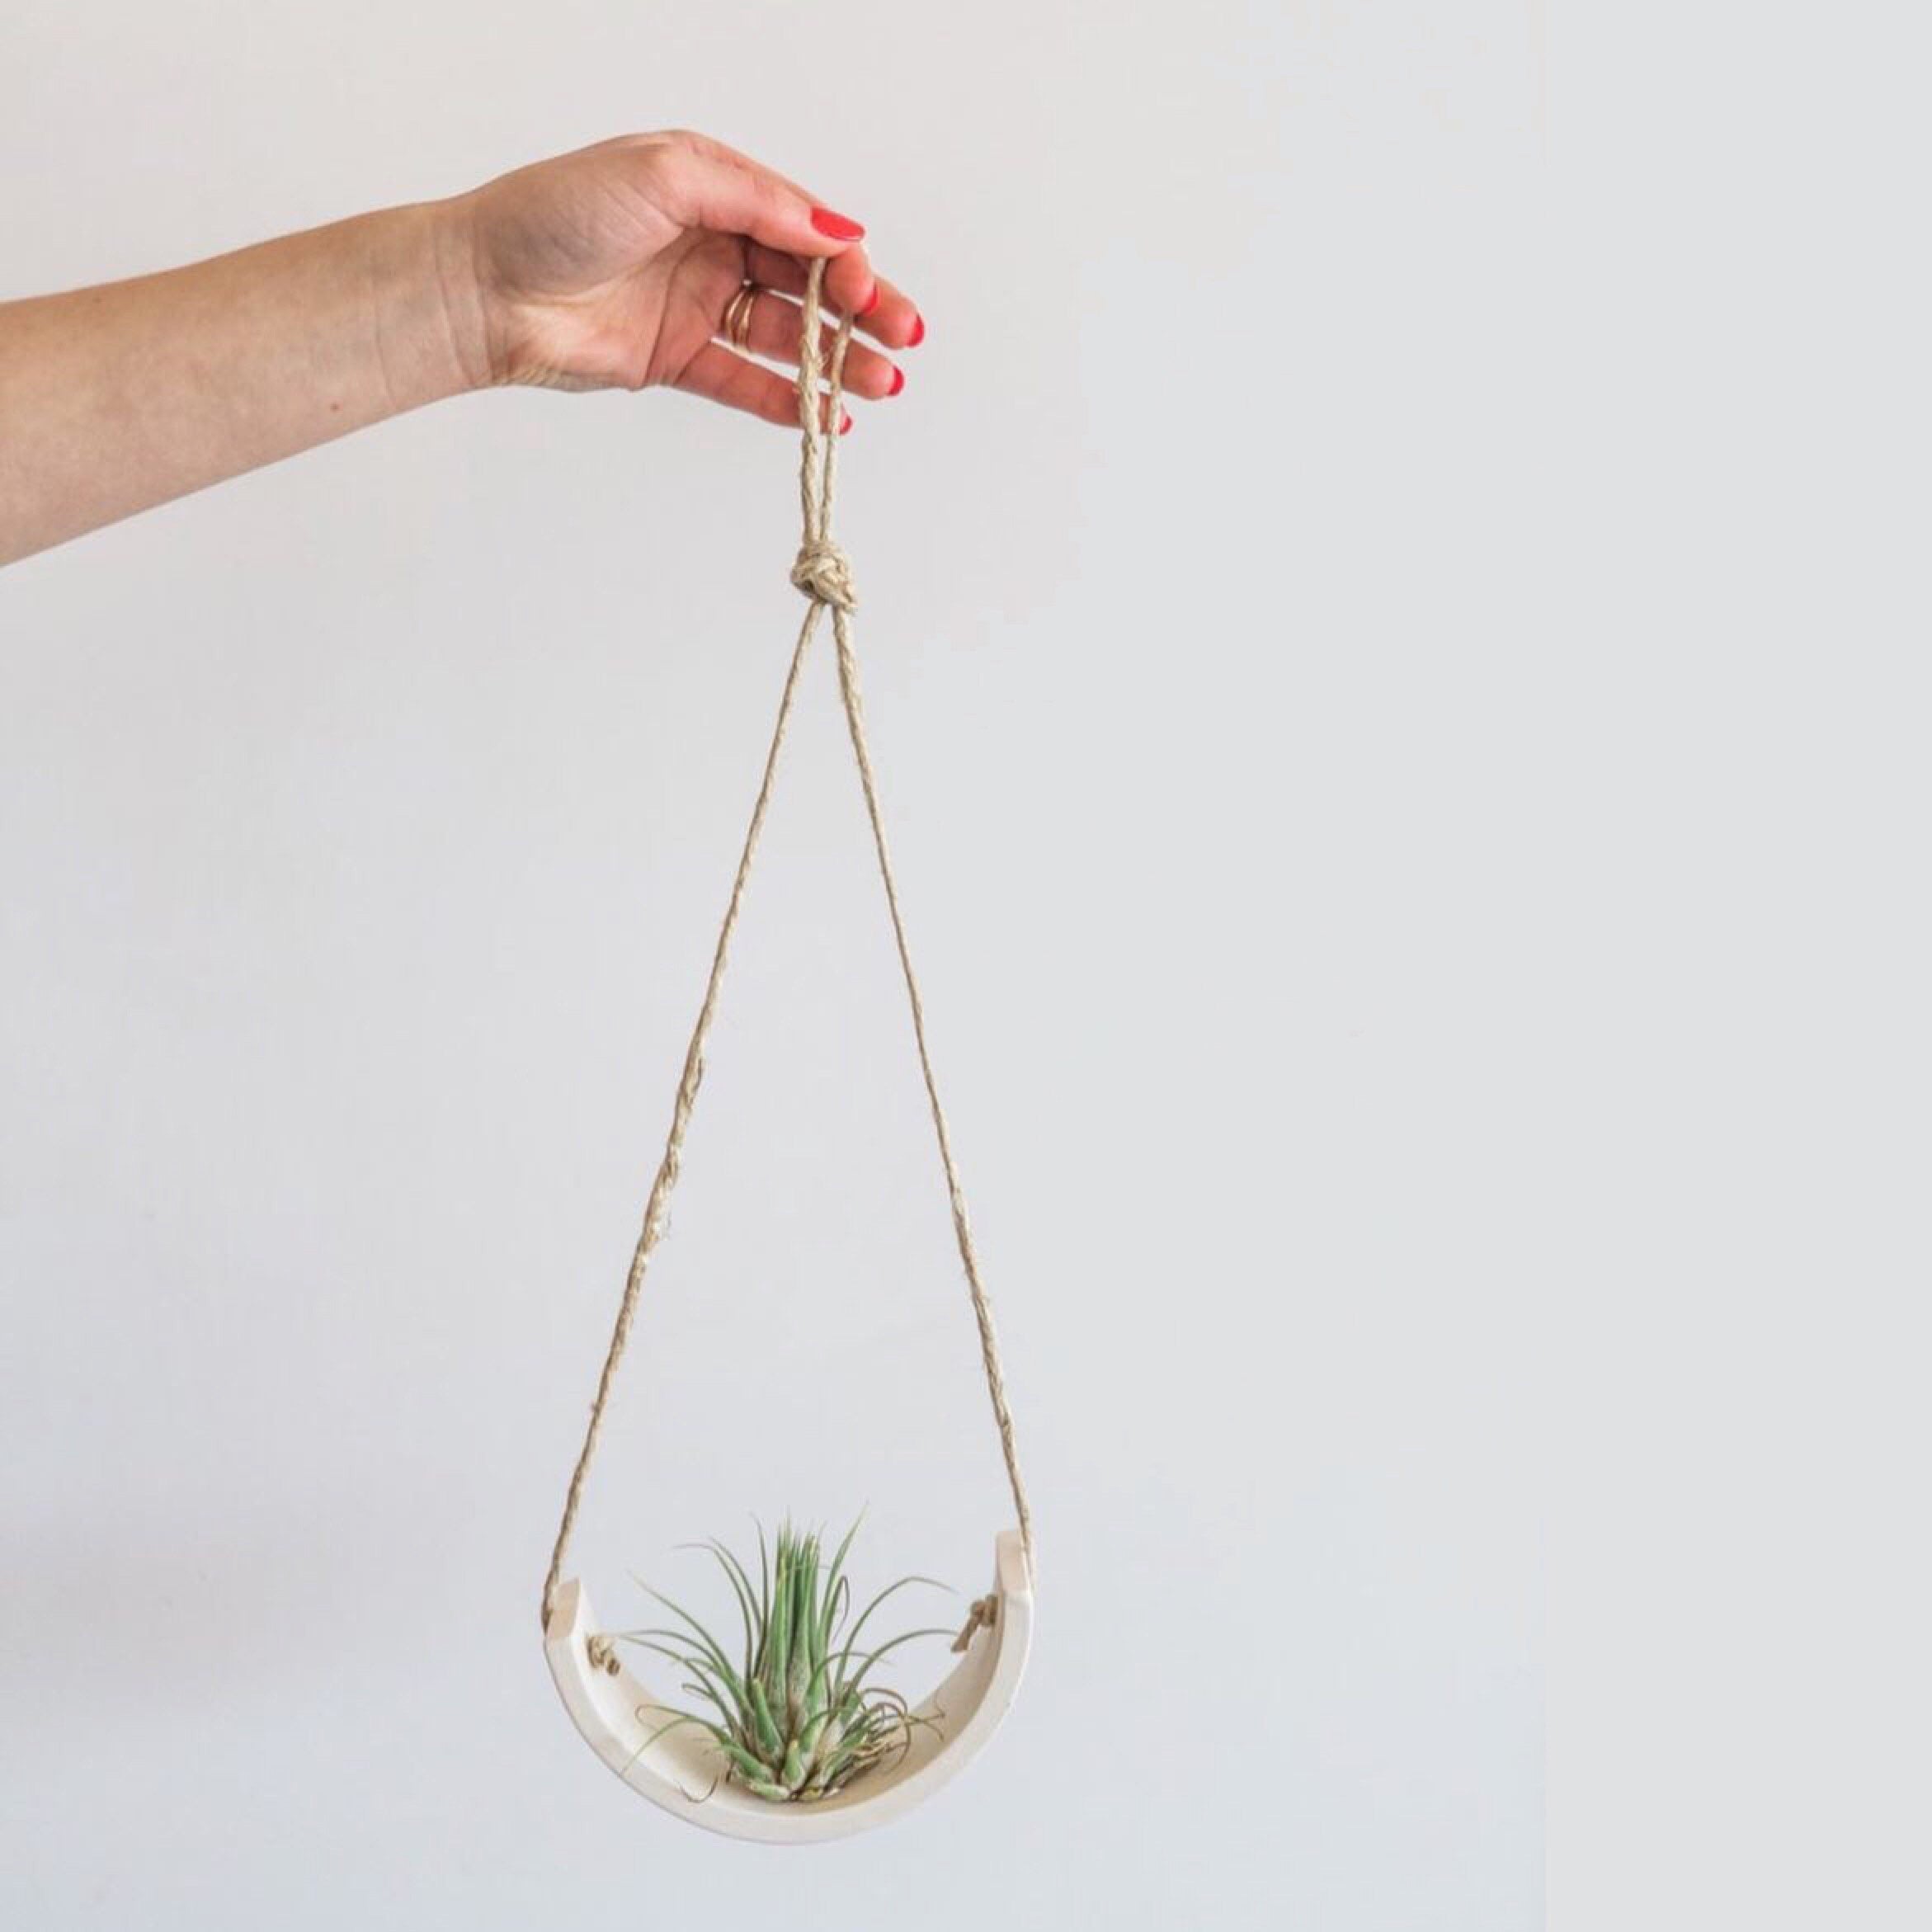 A white person’s hand holds up a white ceramic air plant hanger by a hemp cord.